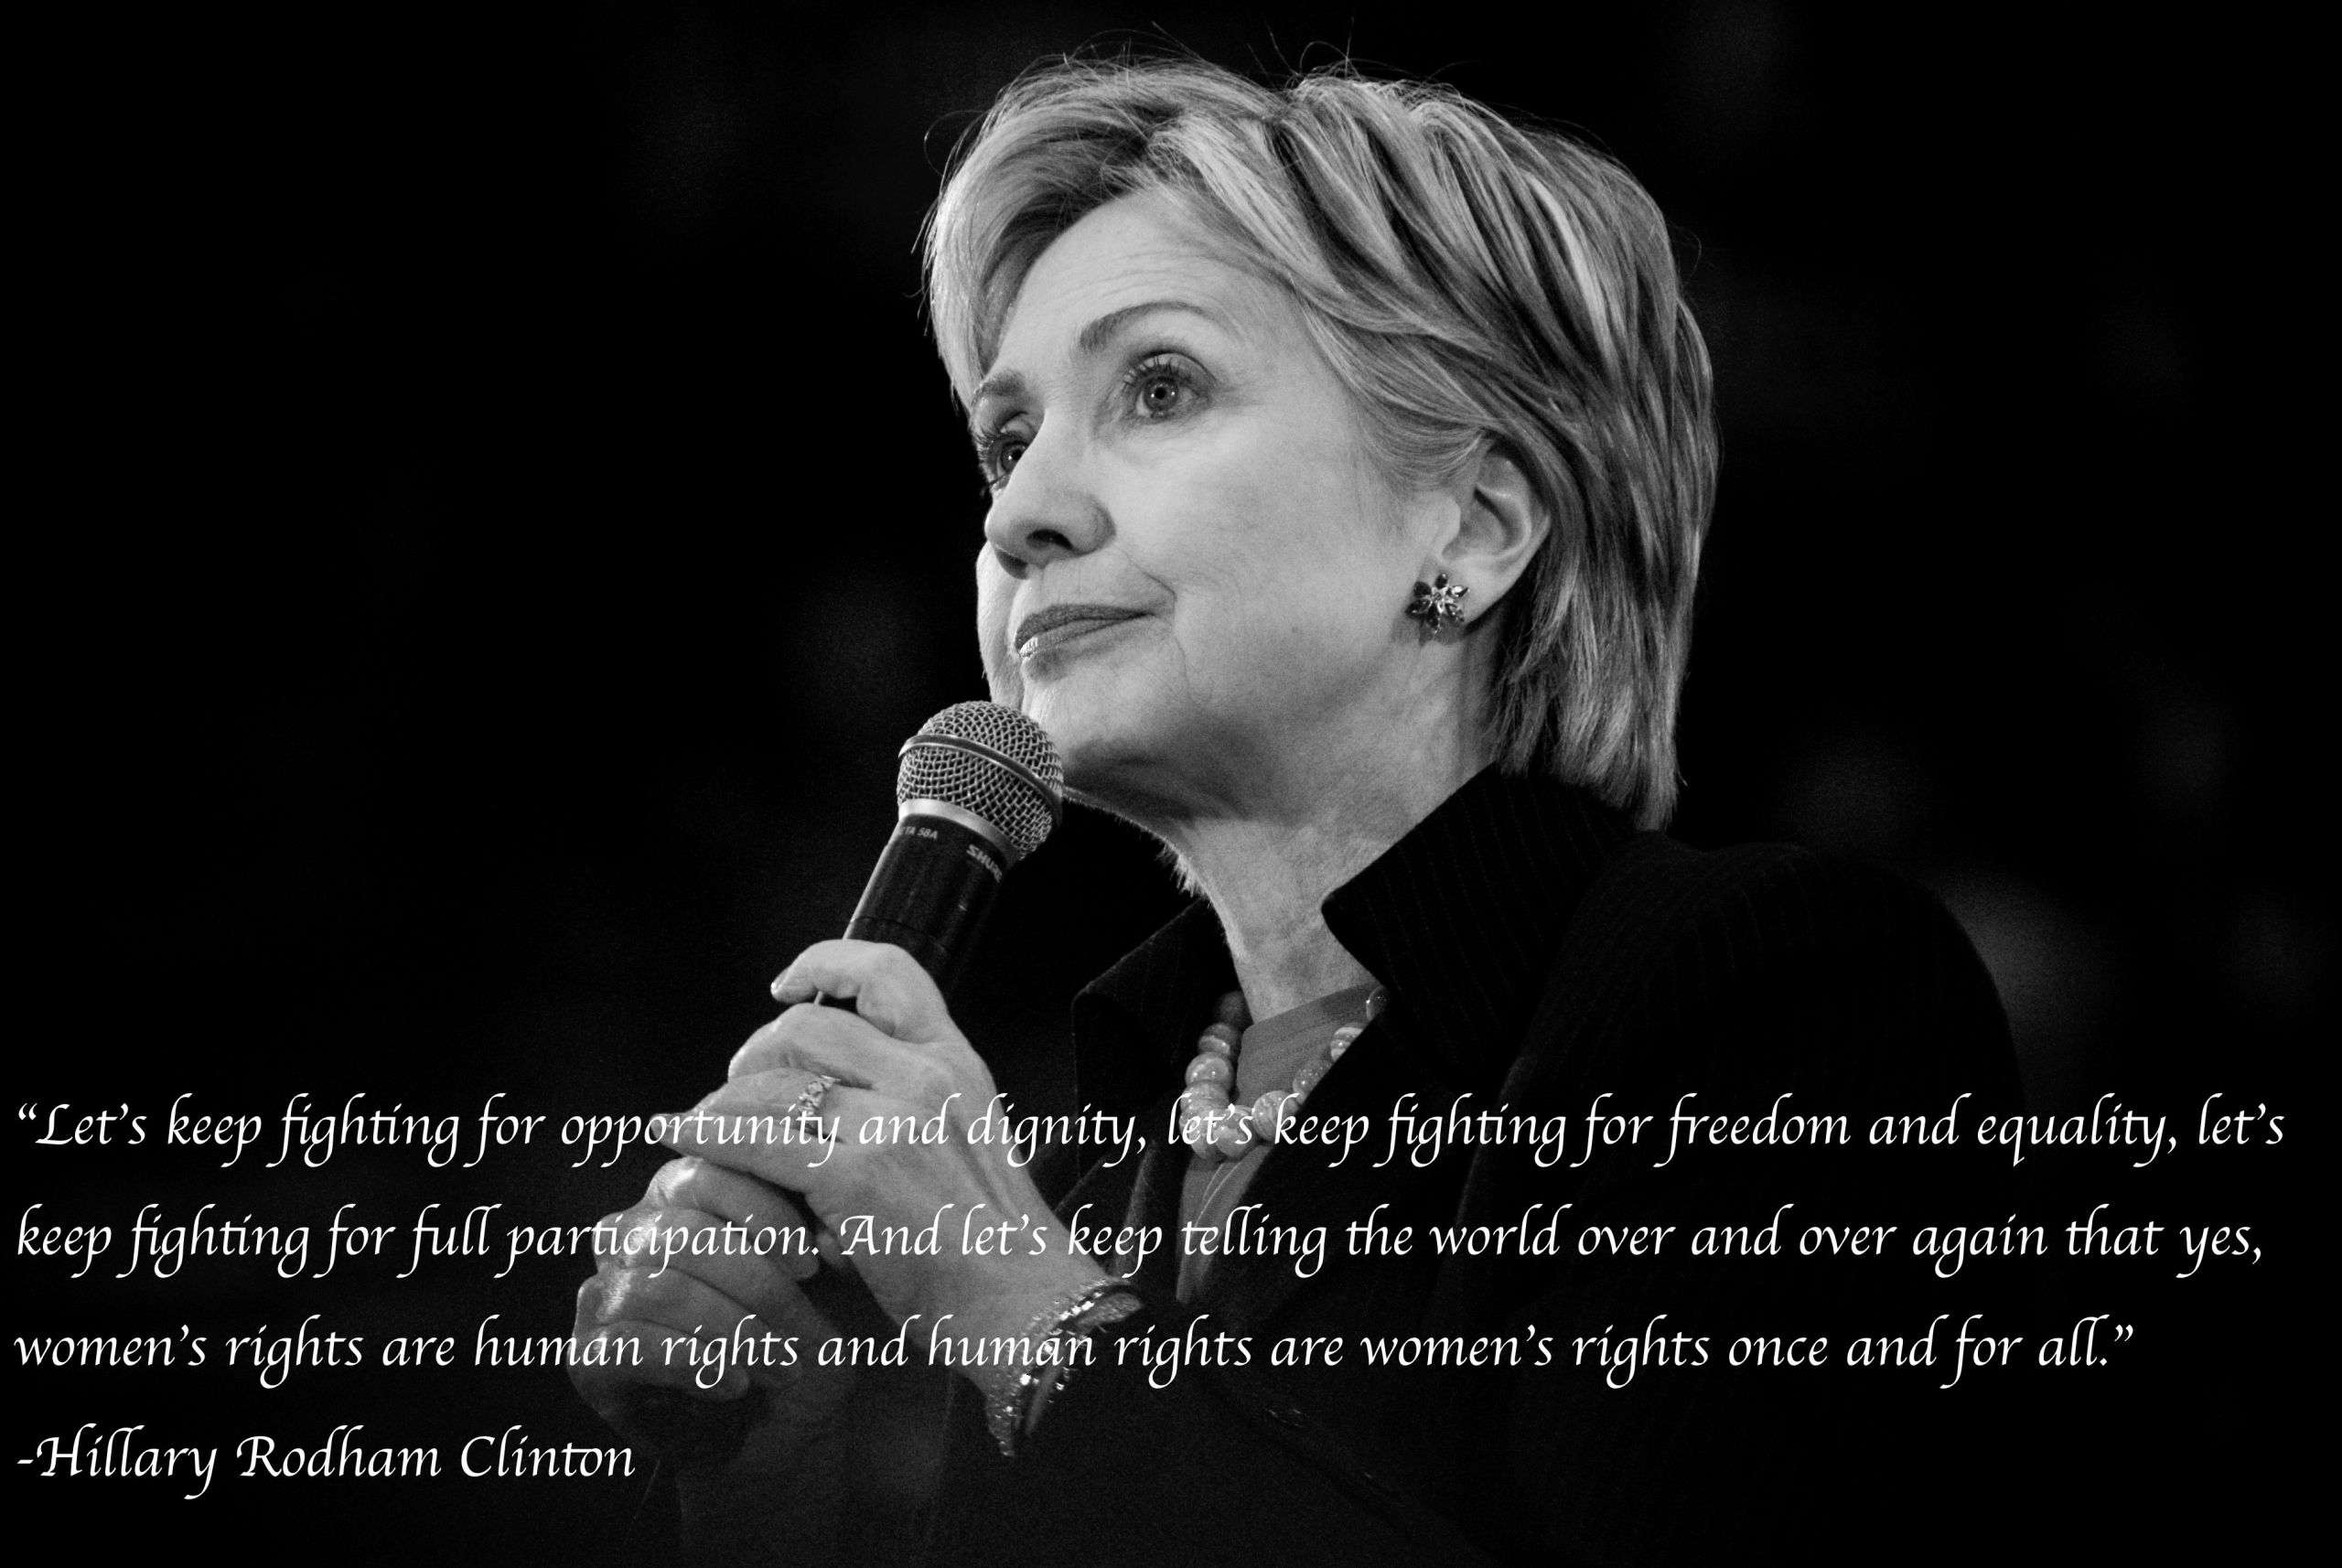 Hillary Clinton Inspirational Quotes
 Hillary Clinton Famous Quotes QuotesGram